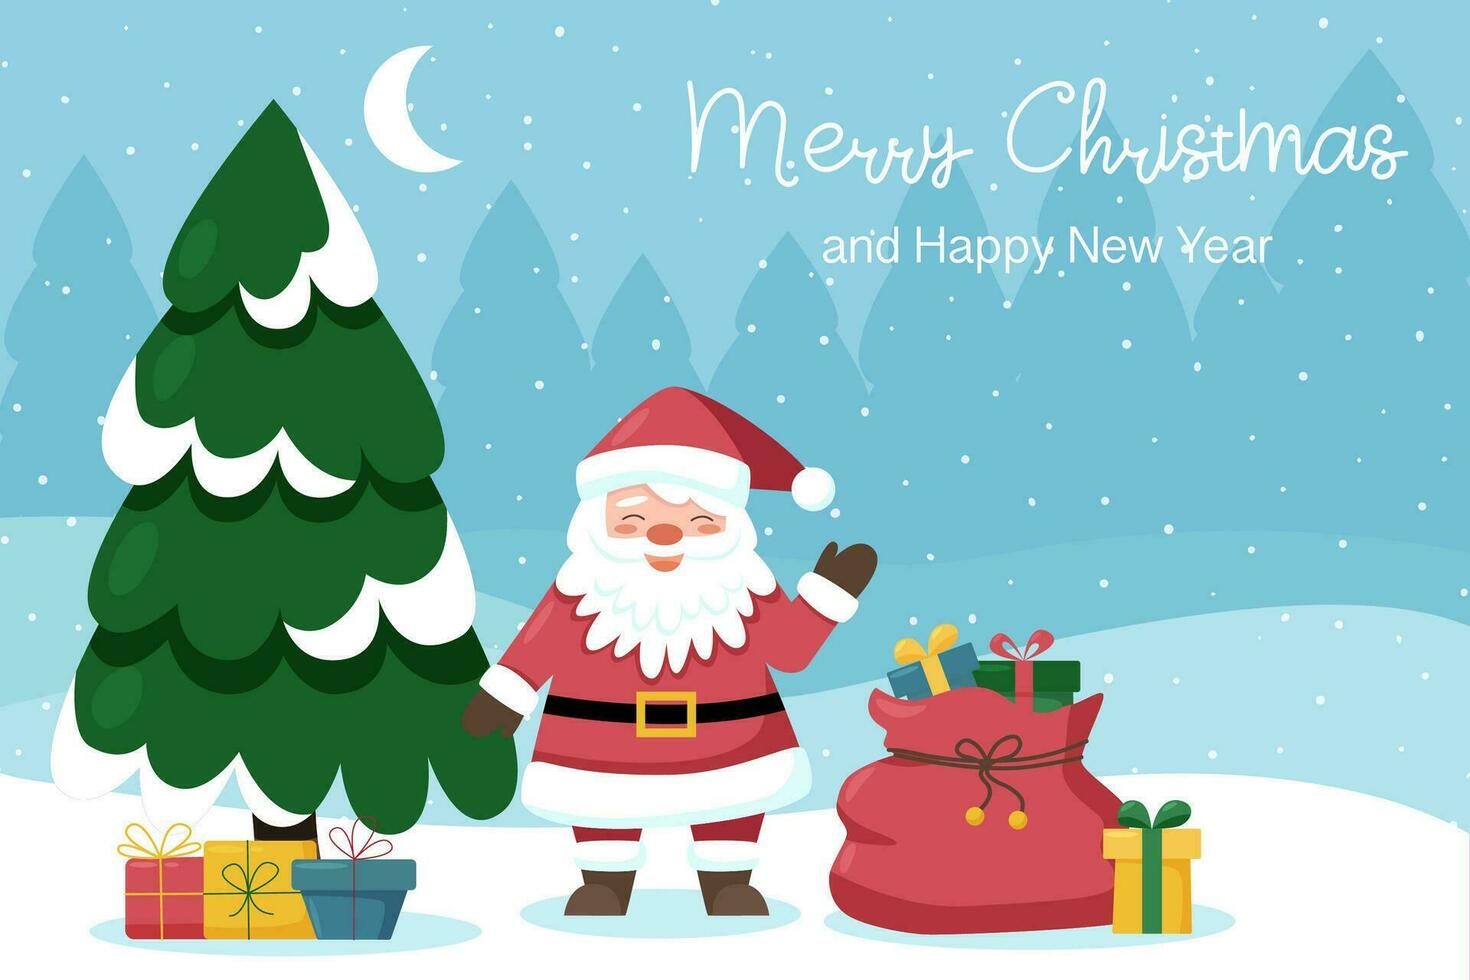 Santa Claus with gift boxes near Christmas tree vector